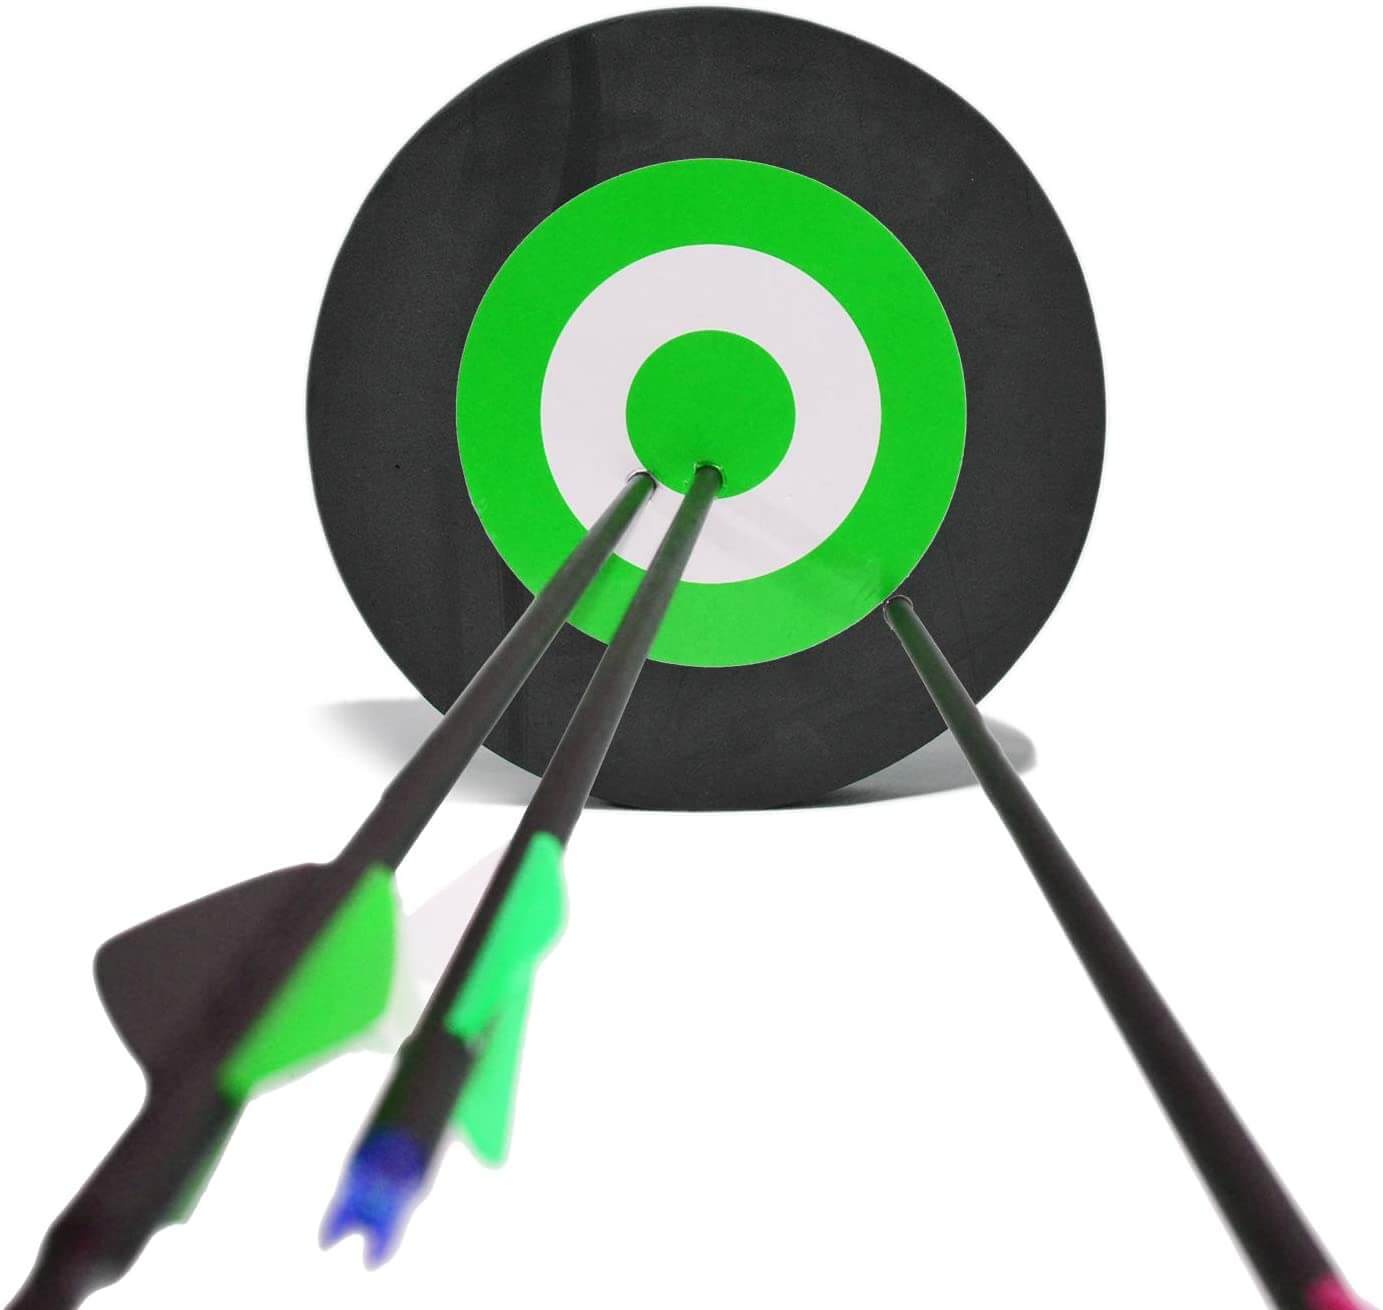 Portable Youth Archery Arrow Target for Shooting Practice